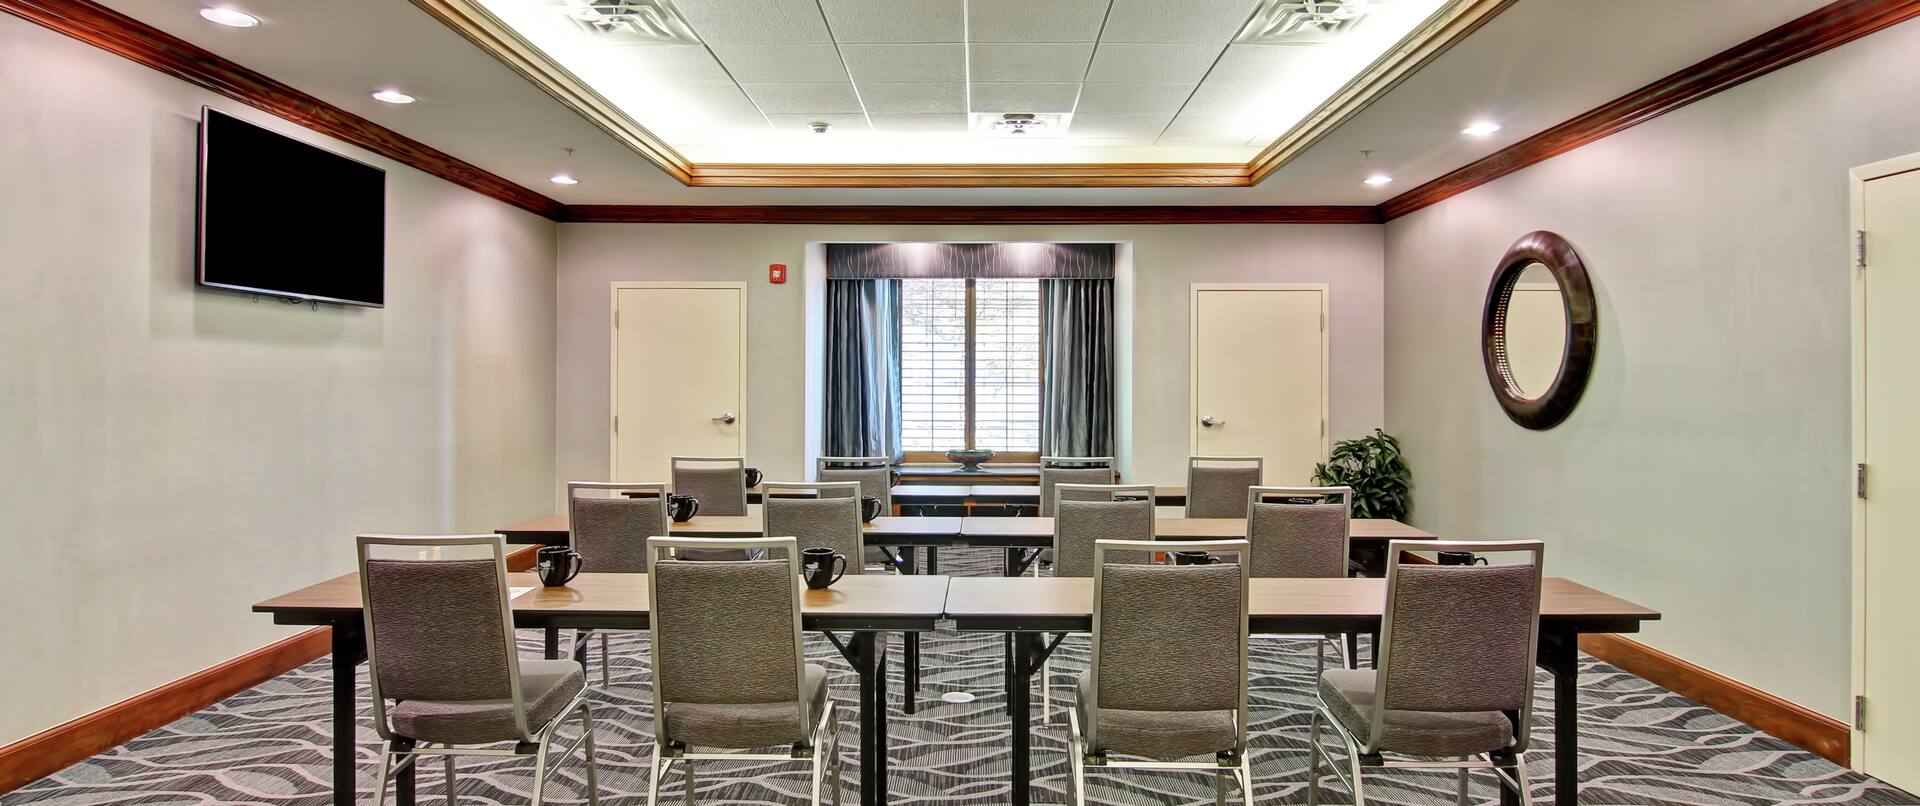 Classroom Setup in Meeting Room With TV, Tables and Chairs Facing Window With Open Drapes